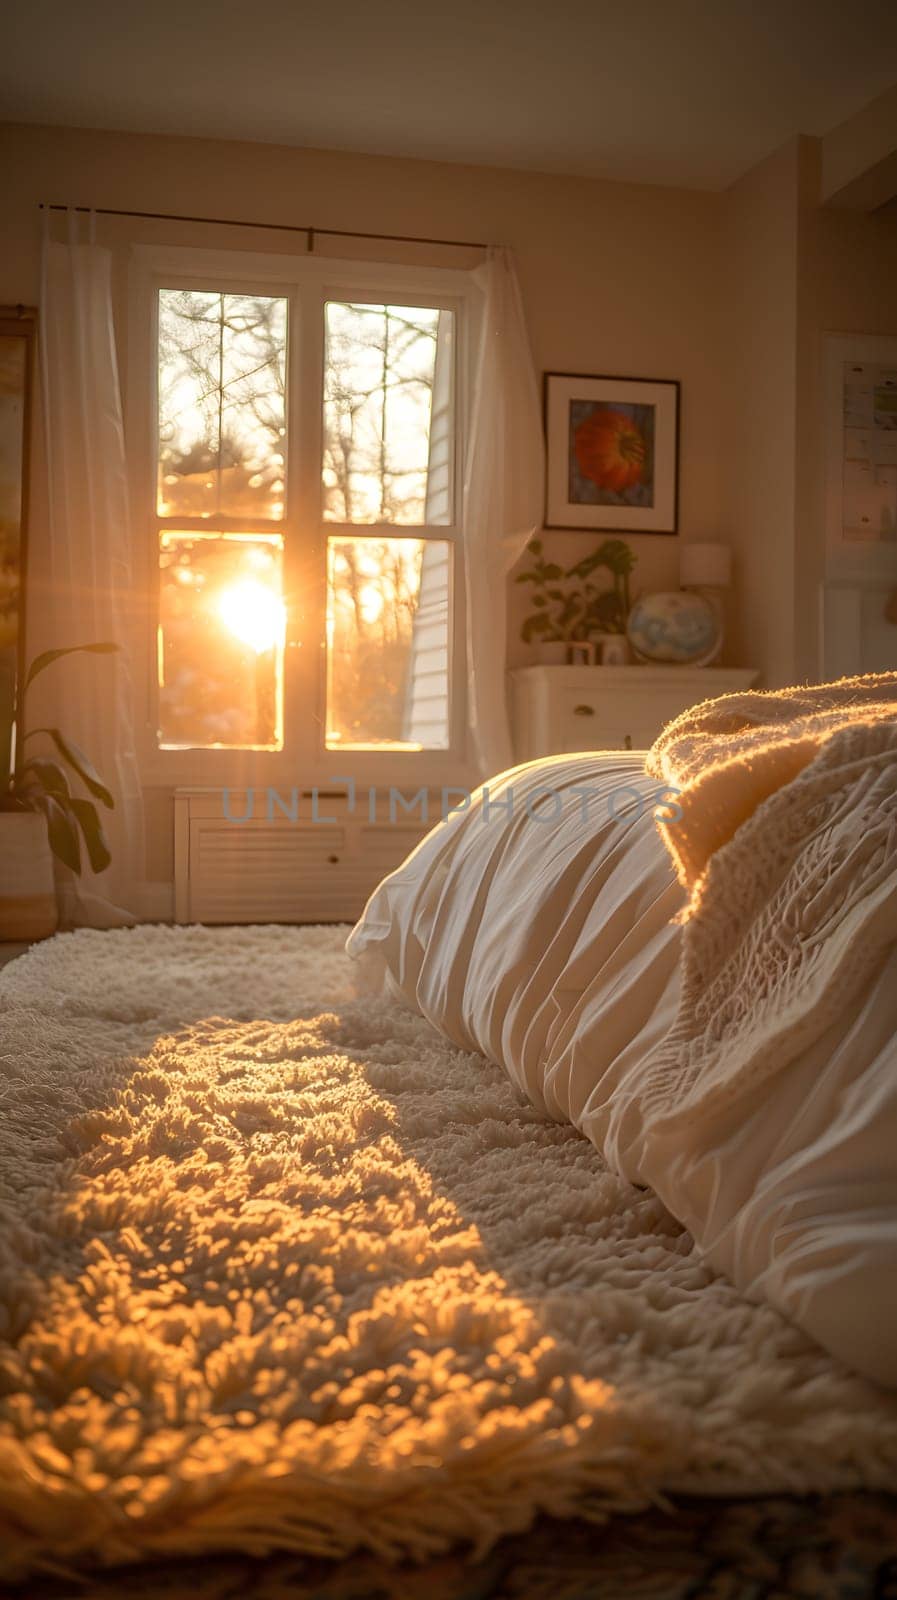 A cozy bedroom in a building with hardwood flooring and a wood bed frame. The morning sunlight shines through the window, creating a sense of comfort and warmth